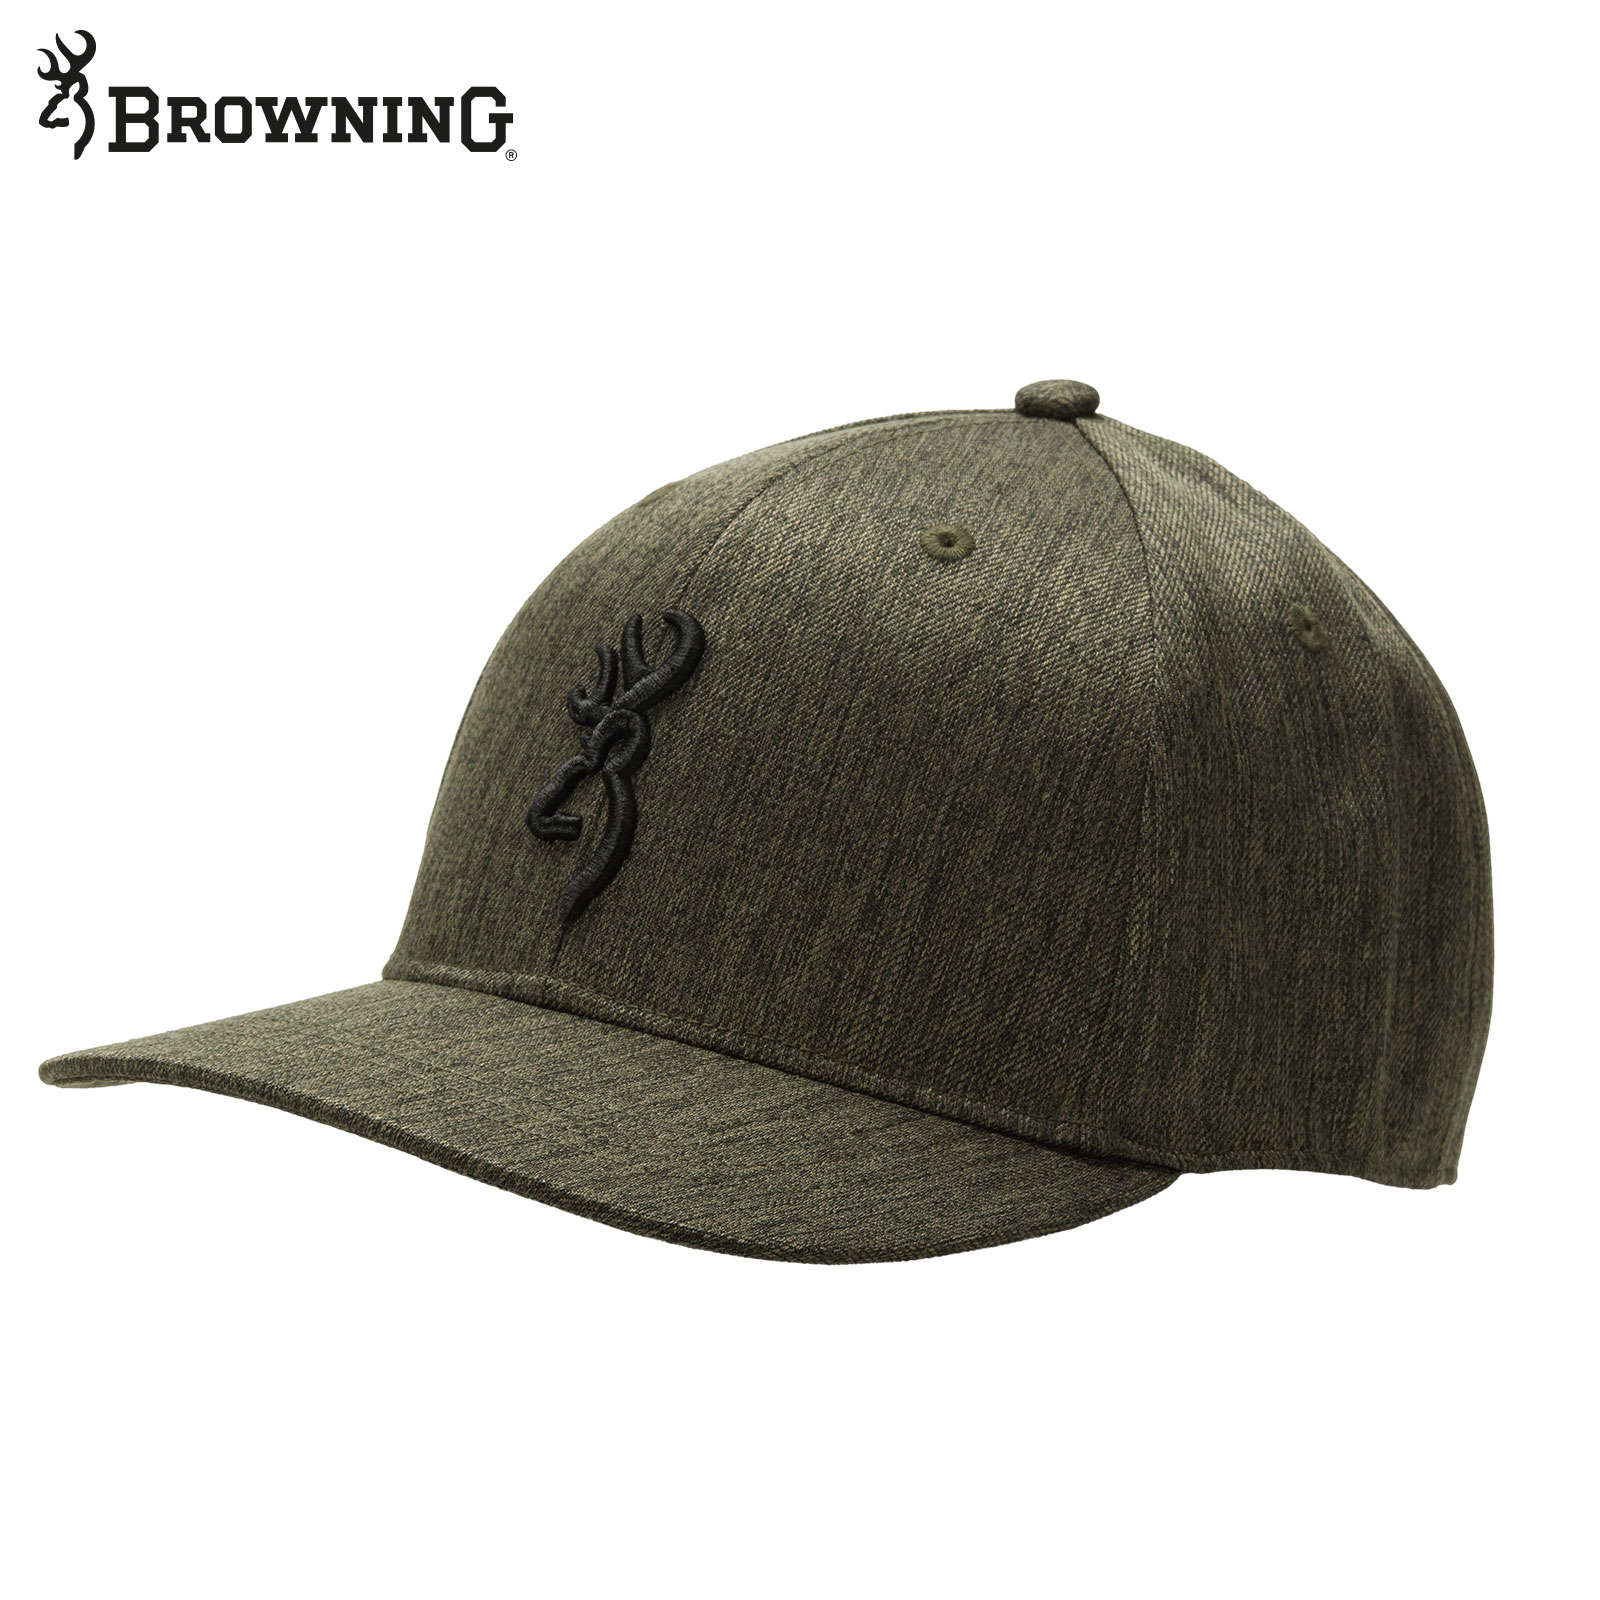 BROWNING Kappe Unlimited Grace